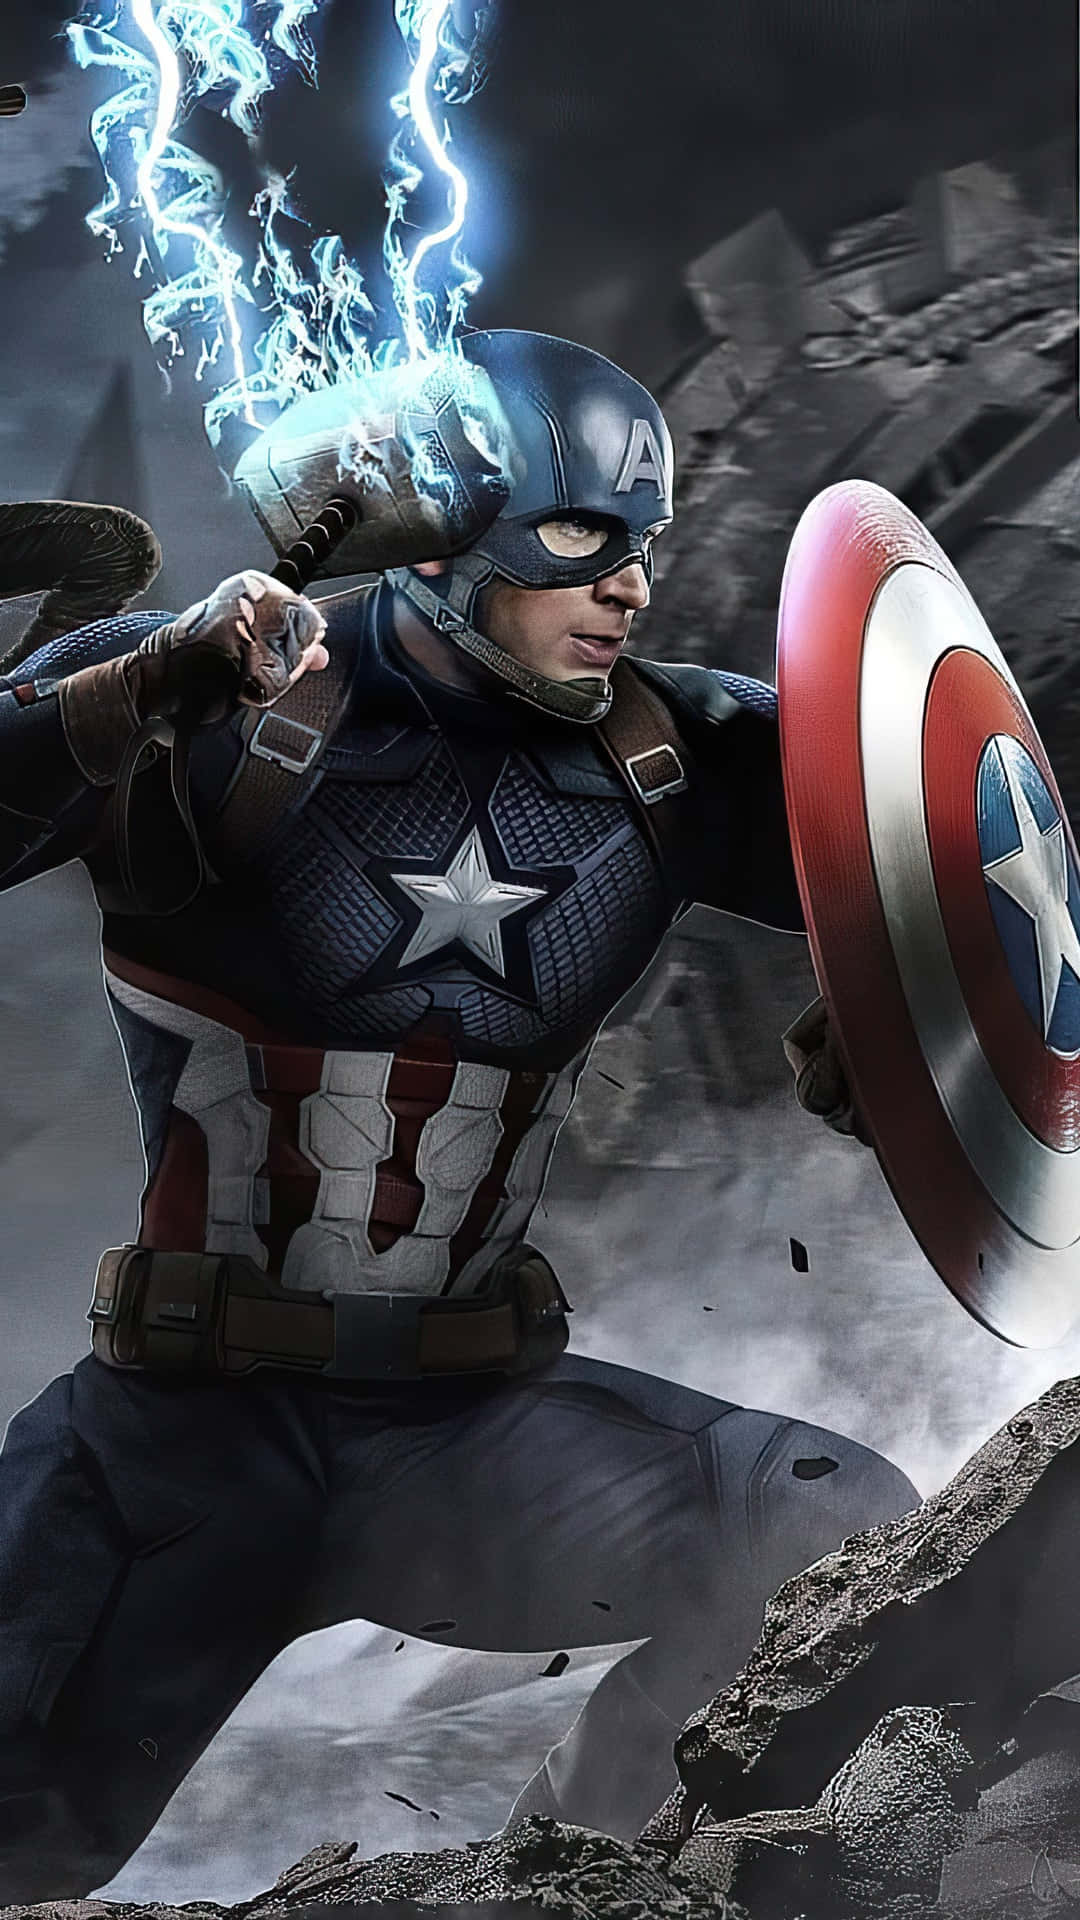 Captain America stands tall in an iconic pose of strength and power Wallpaper